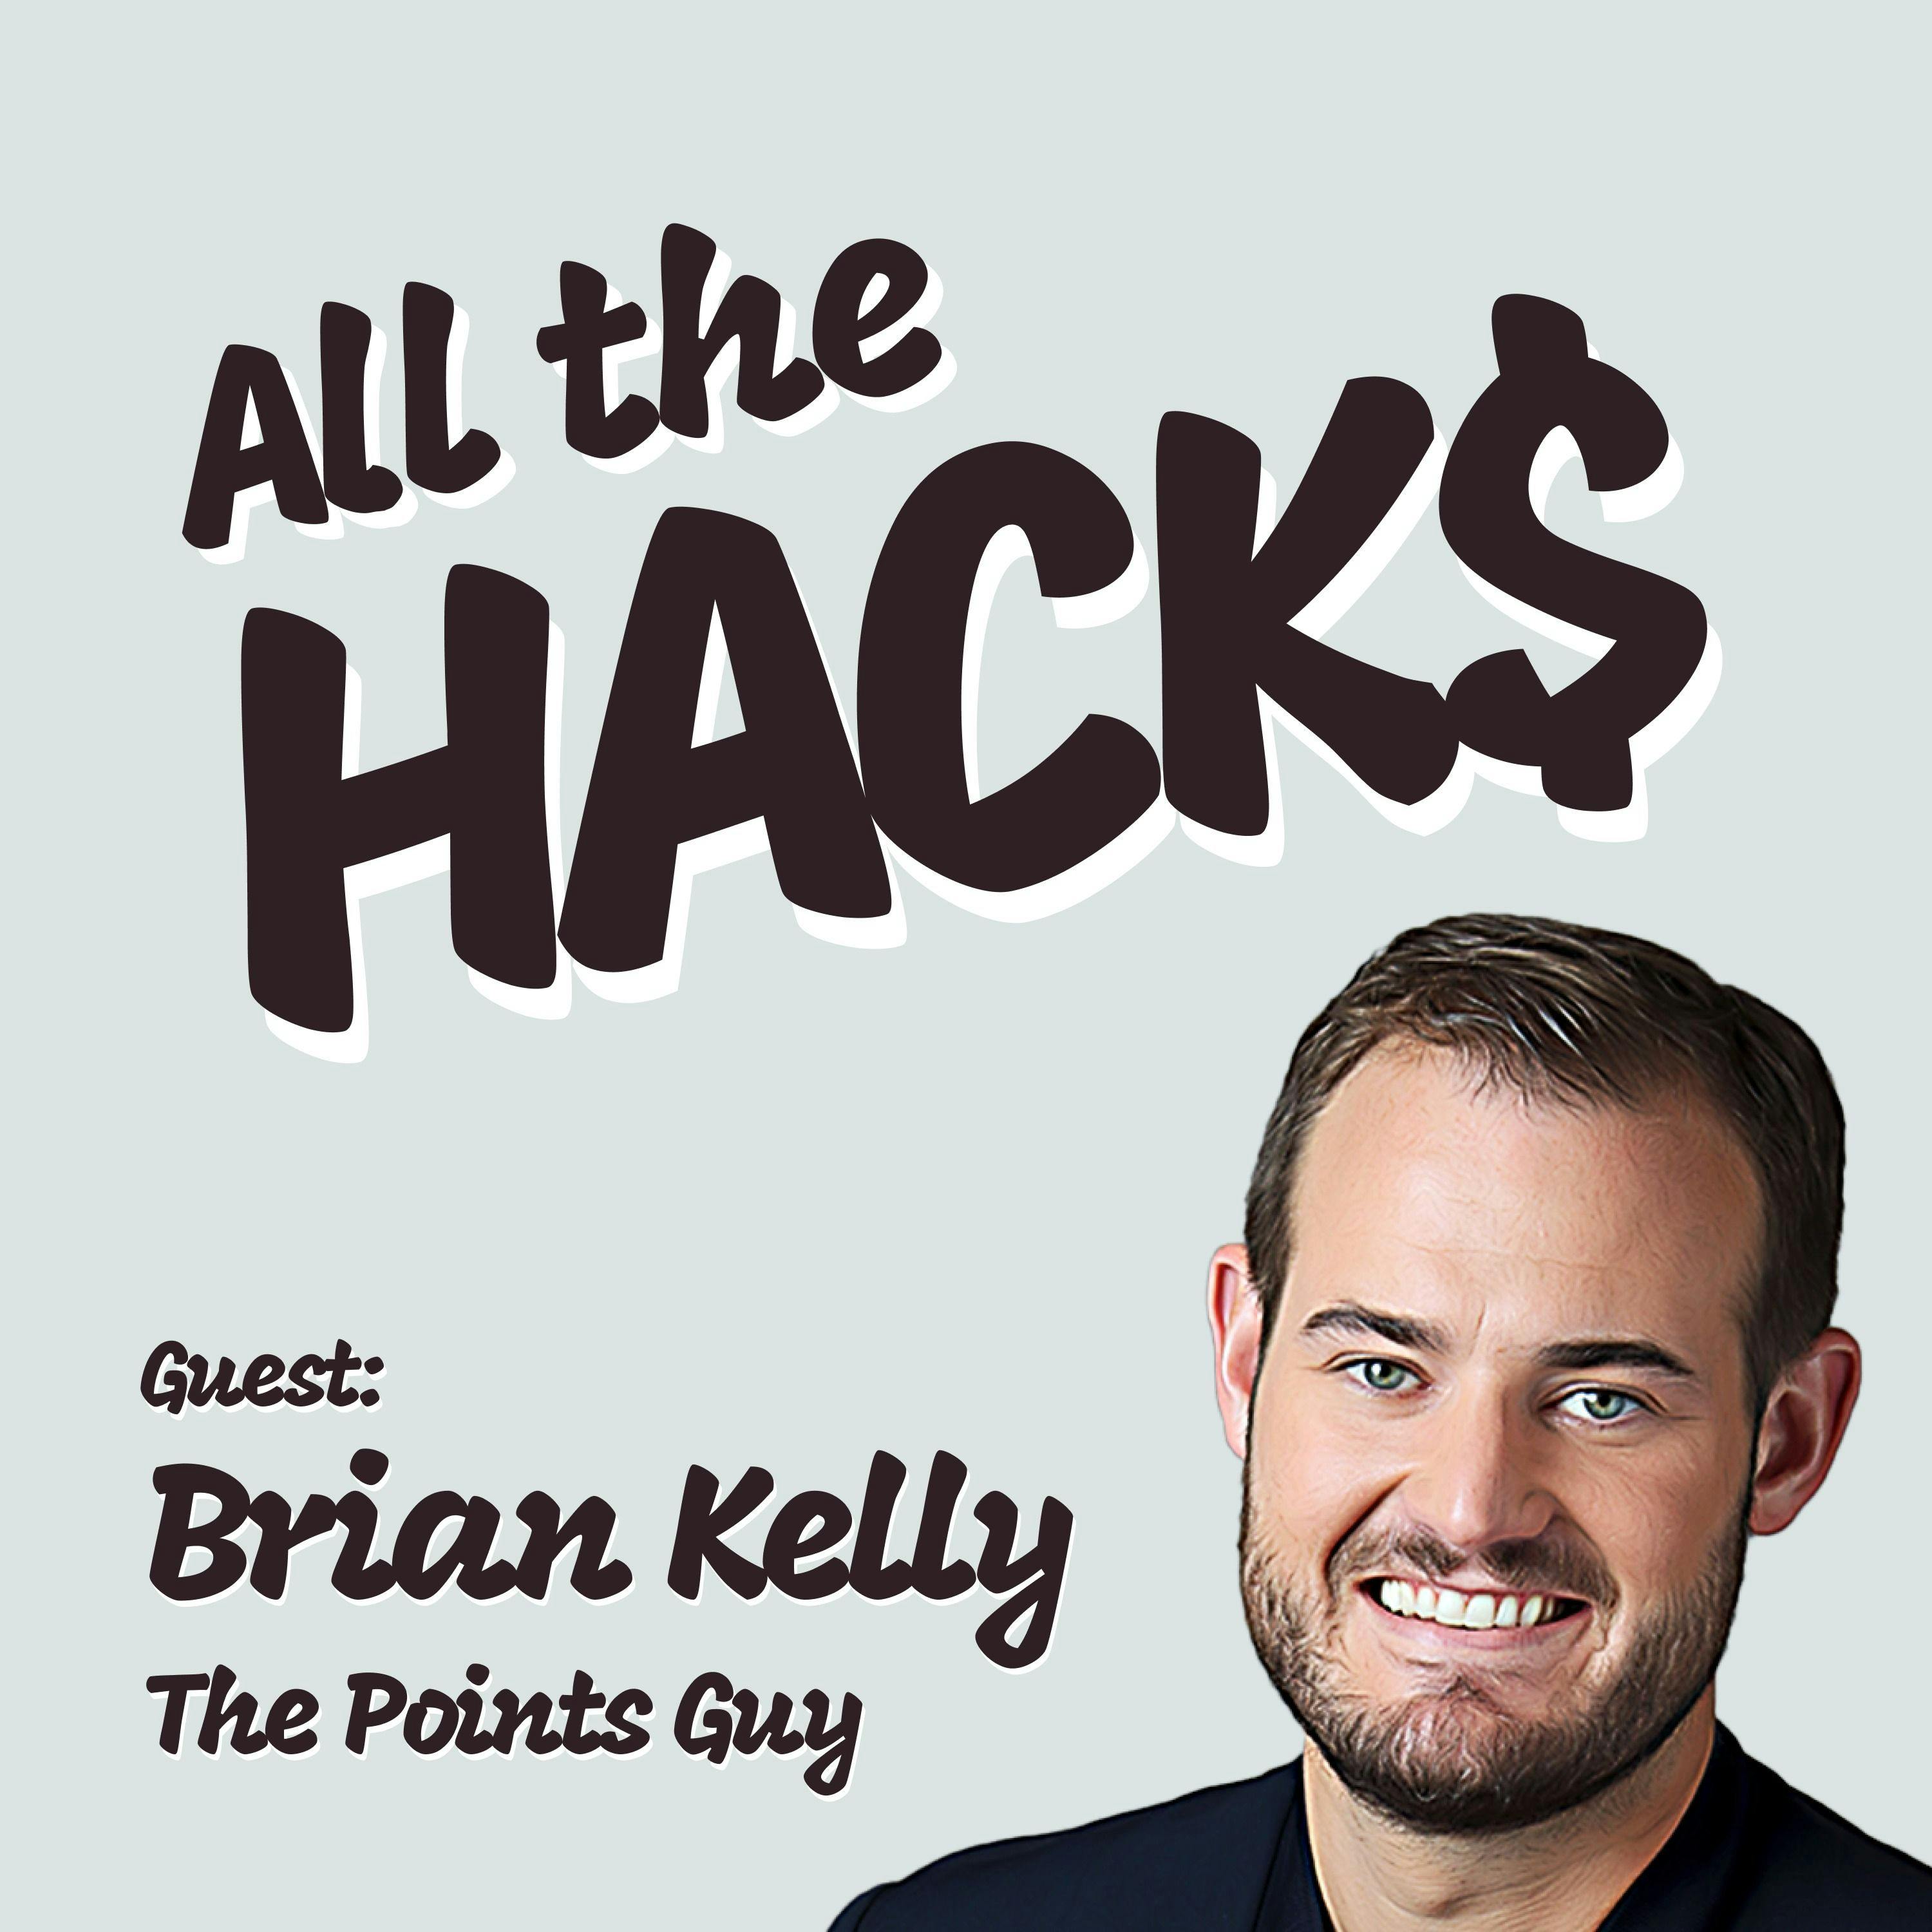 Upgrade Your Travel with The Points Guy, Brian Kelly